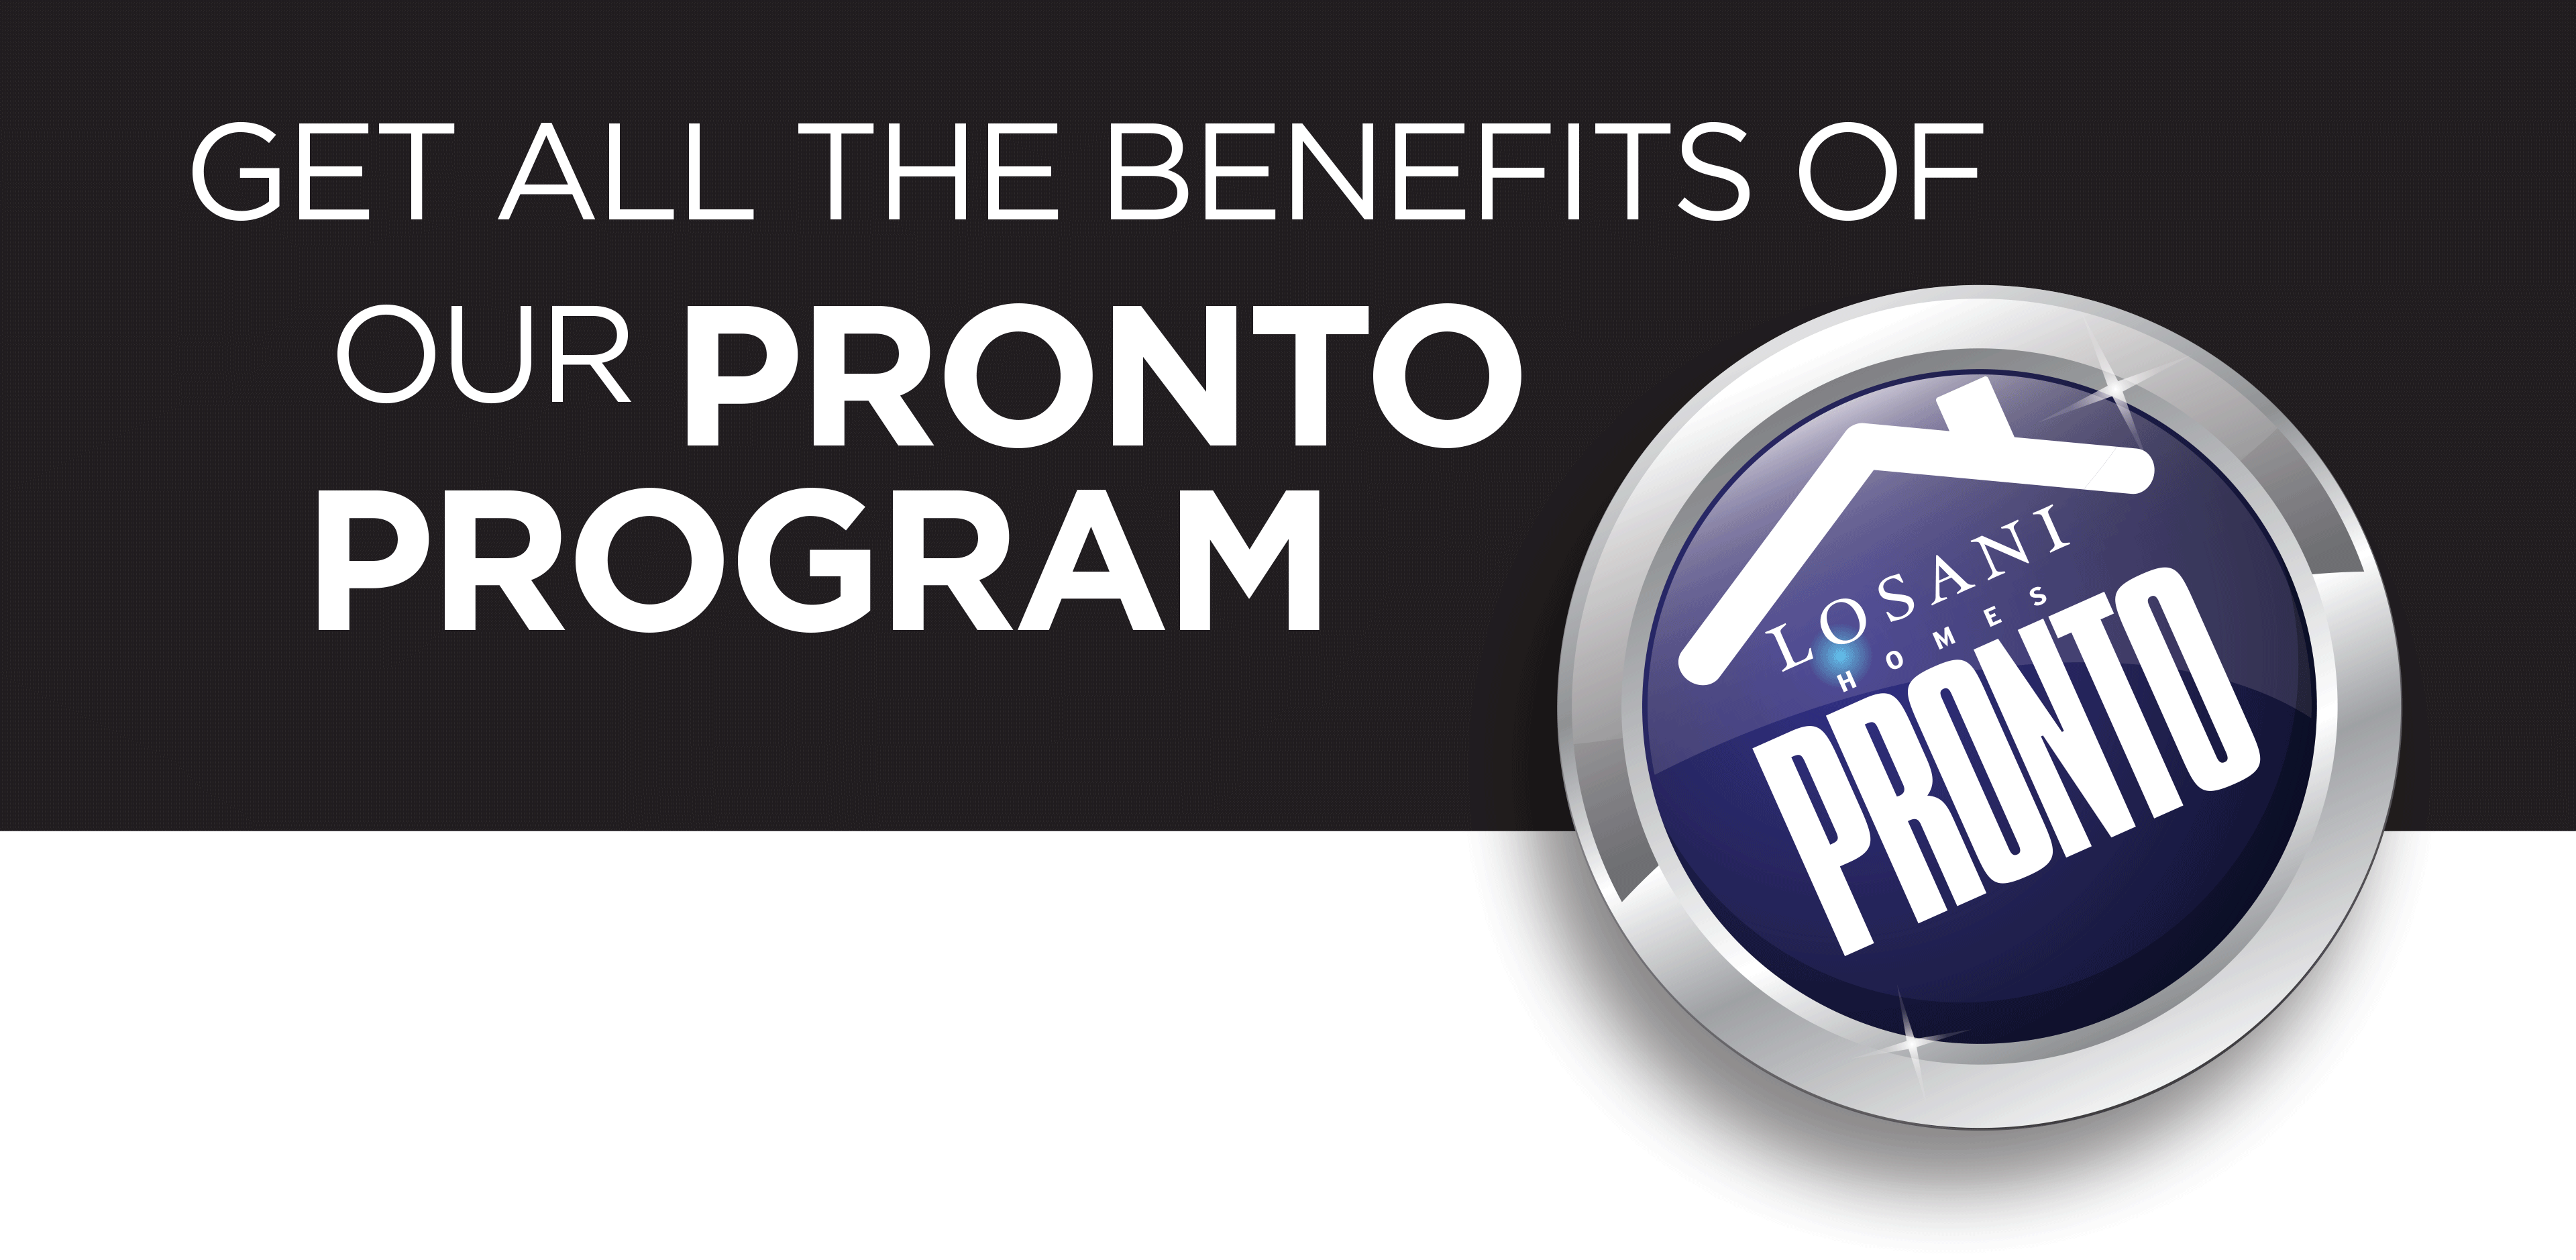 Get all the benefits of our Pronto Program